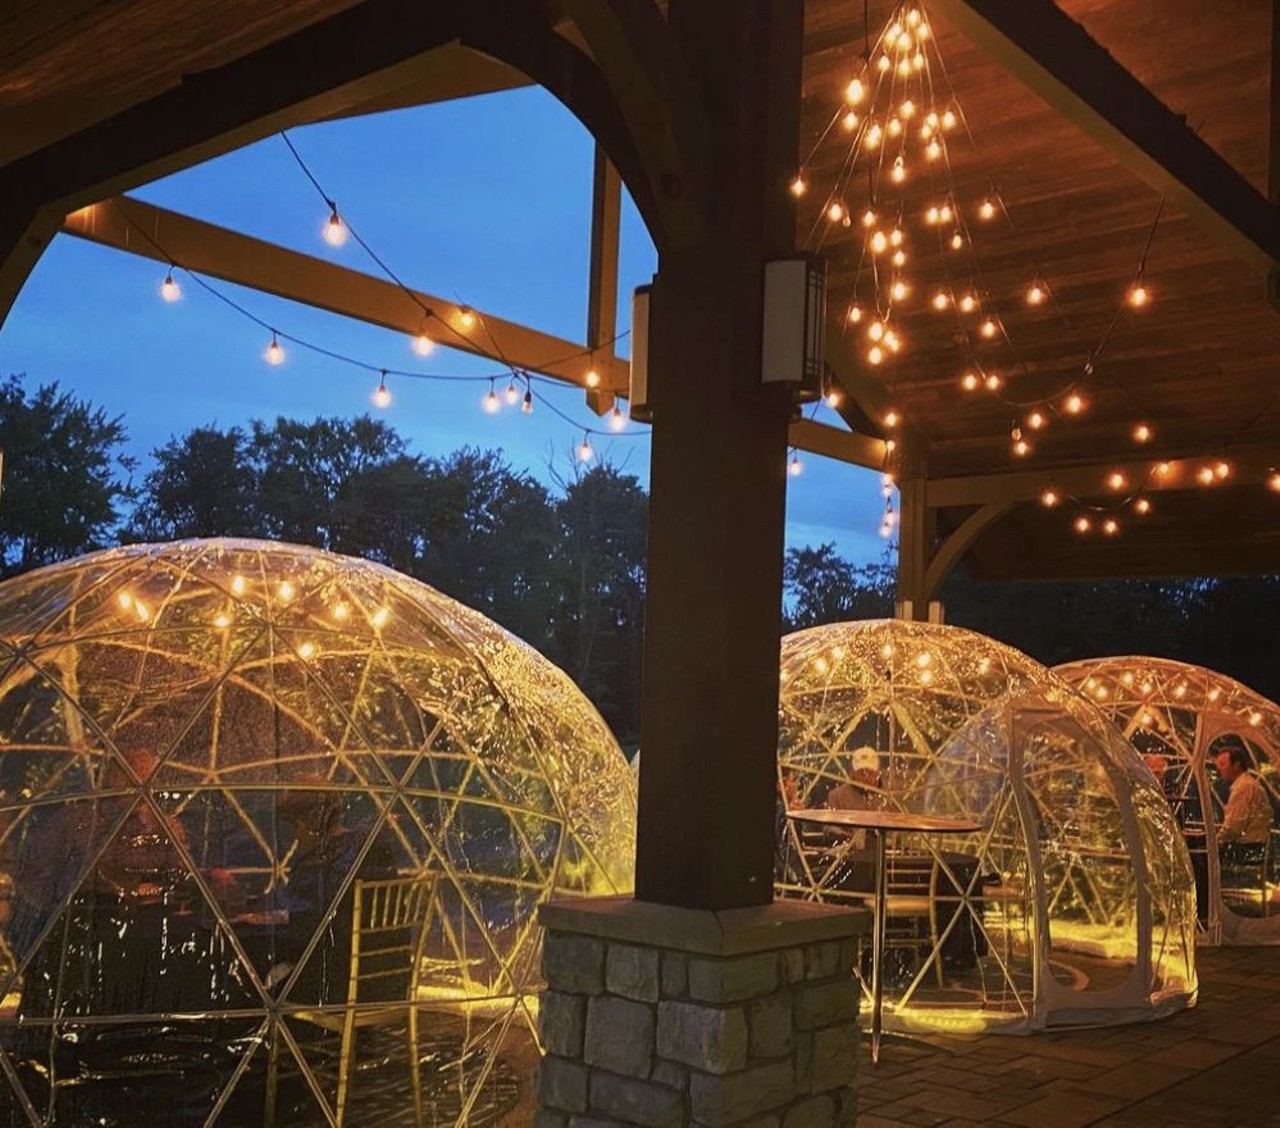 The Rustic Grill
1 Club Dr., Highland Heights 
At Stonewater Golf Club in Highland Heights, their upscale bar and grill has four heated igloos to warm up in this winter. Enjoy a cold beer and a hot burger while staying warm in the igloo.
Photo via @TheRusticGrill/Instagram